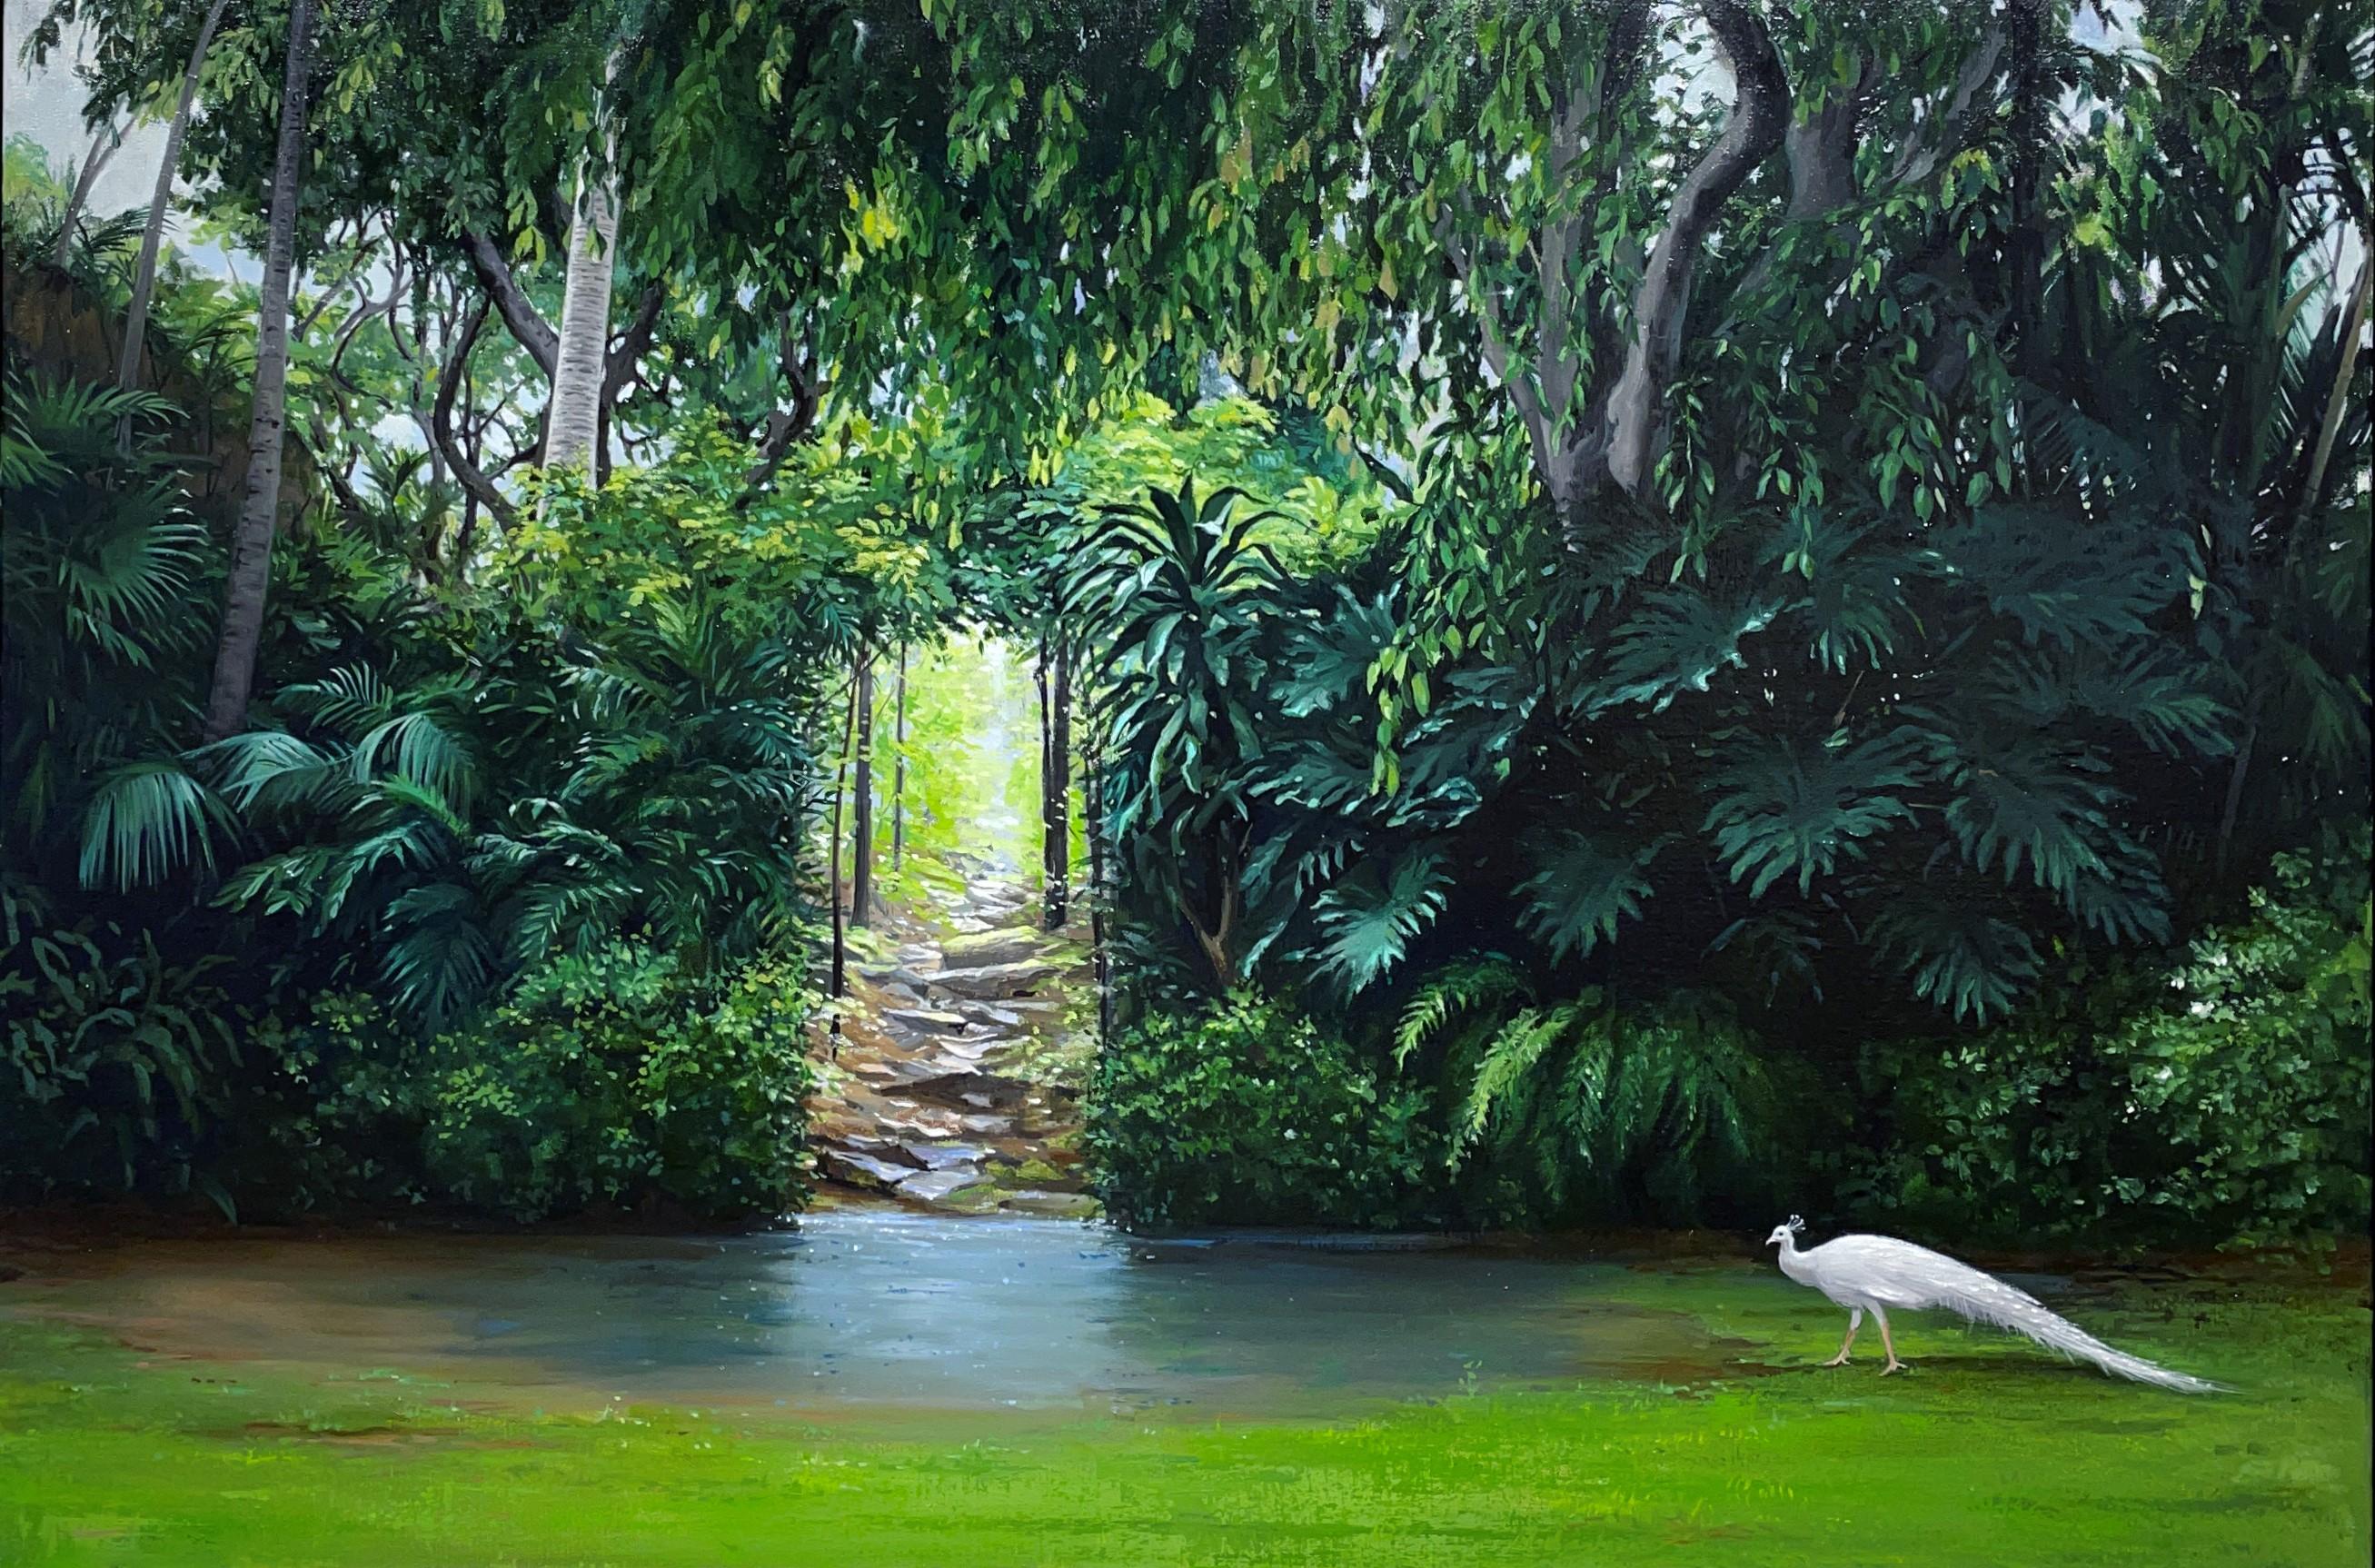 Carol Pylant Still-Life Painting - Echo, Lush Tropical Scene with Pond and Peacock, Original Oil on Linen, Framed